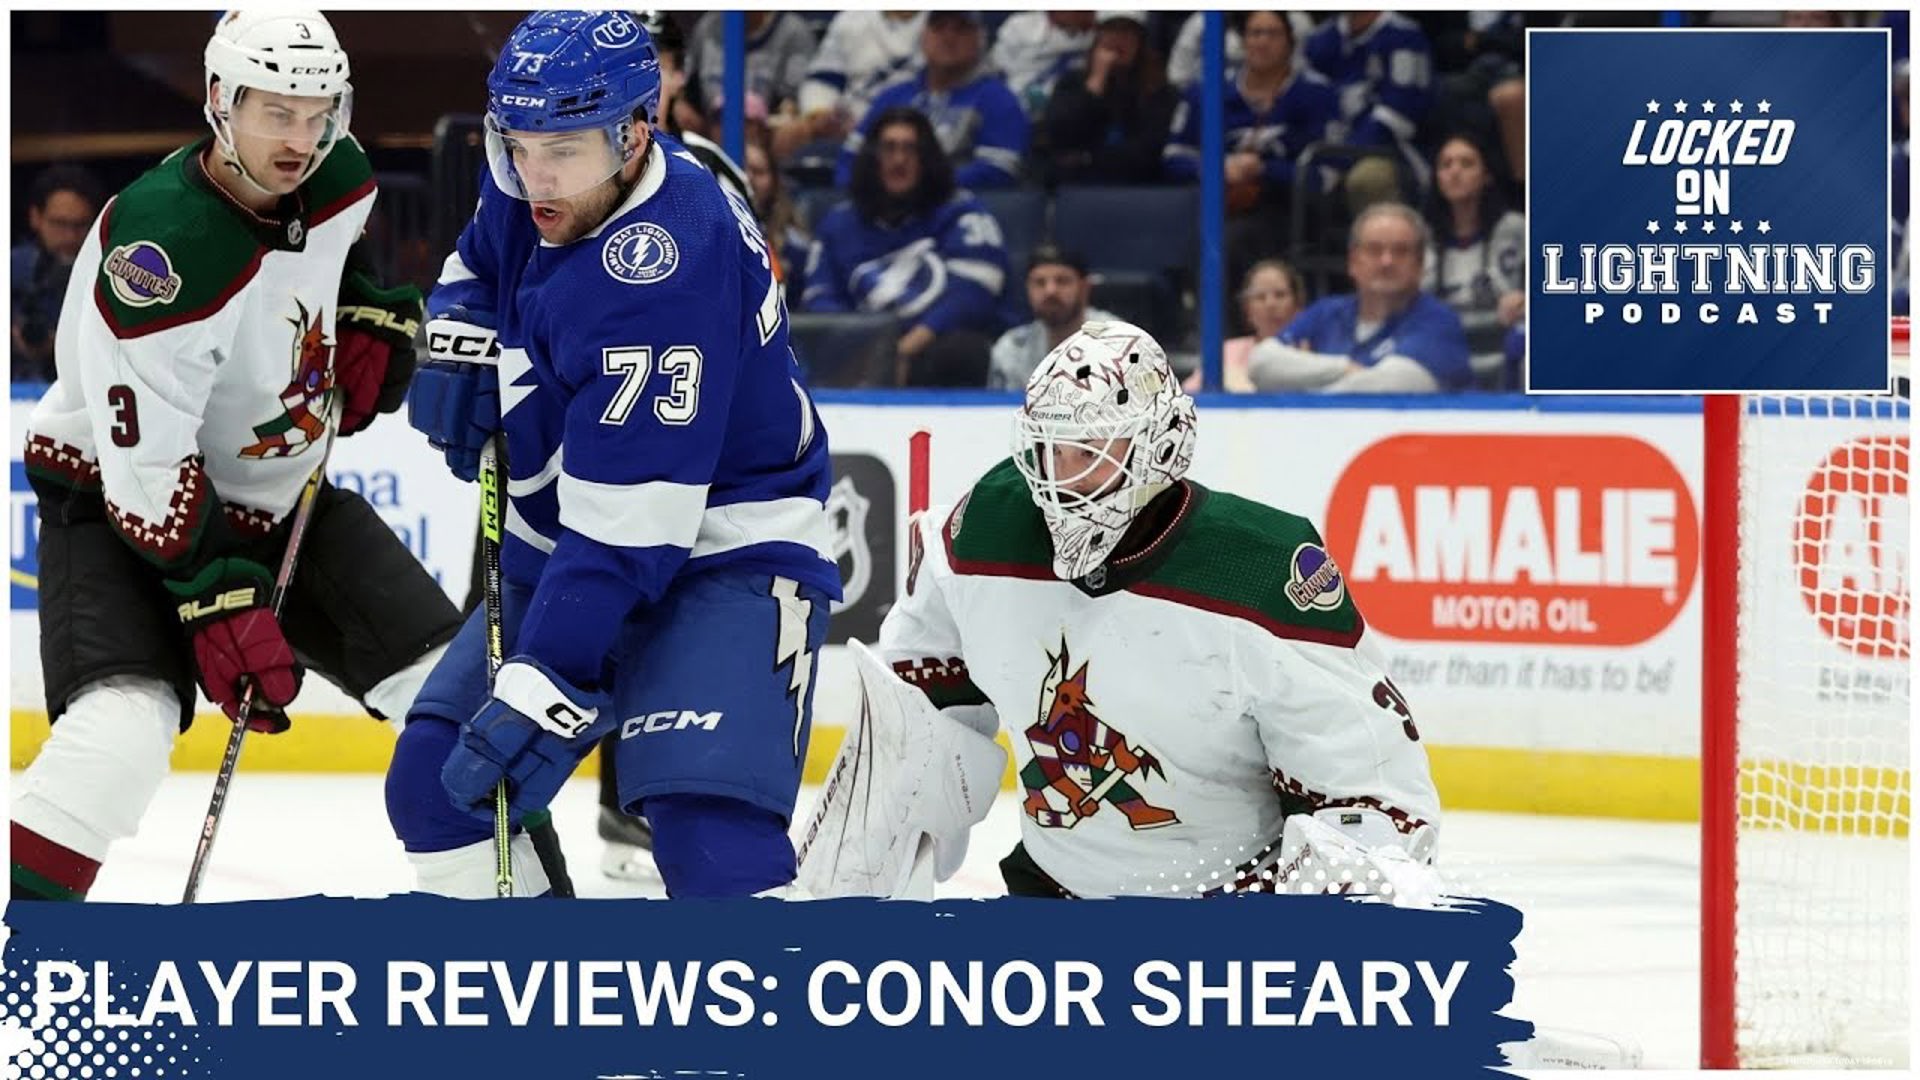 One of the obstacles in the Lightning's mission this offseason to clear cap space is Conor Sheary. Sheary is coming off his inaugural season in Tampa Bay